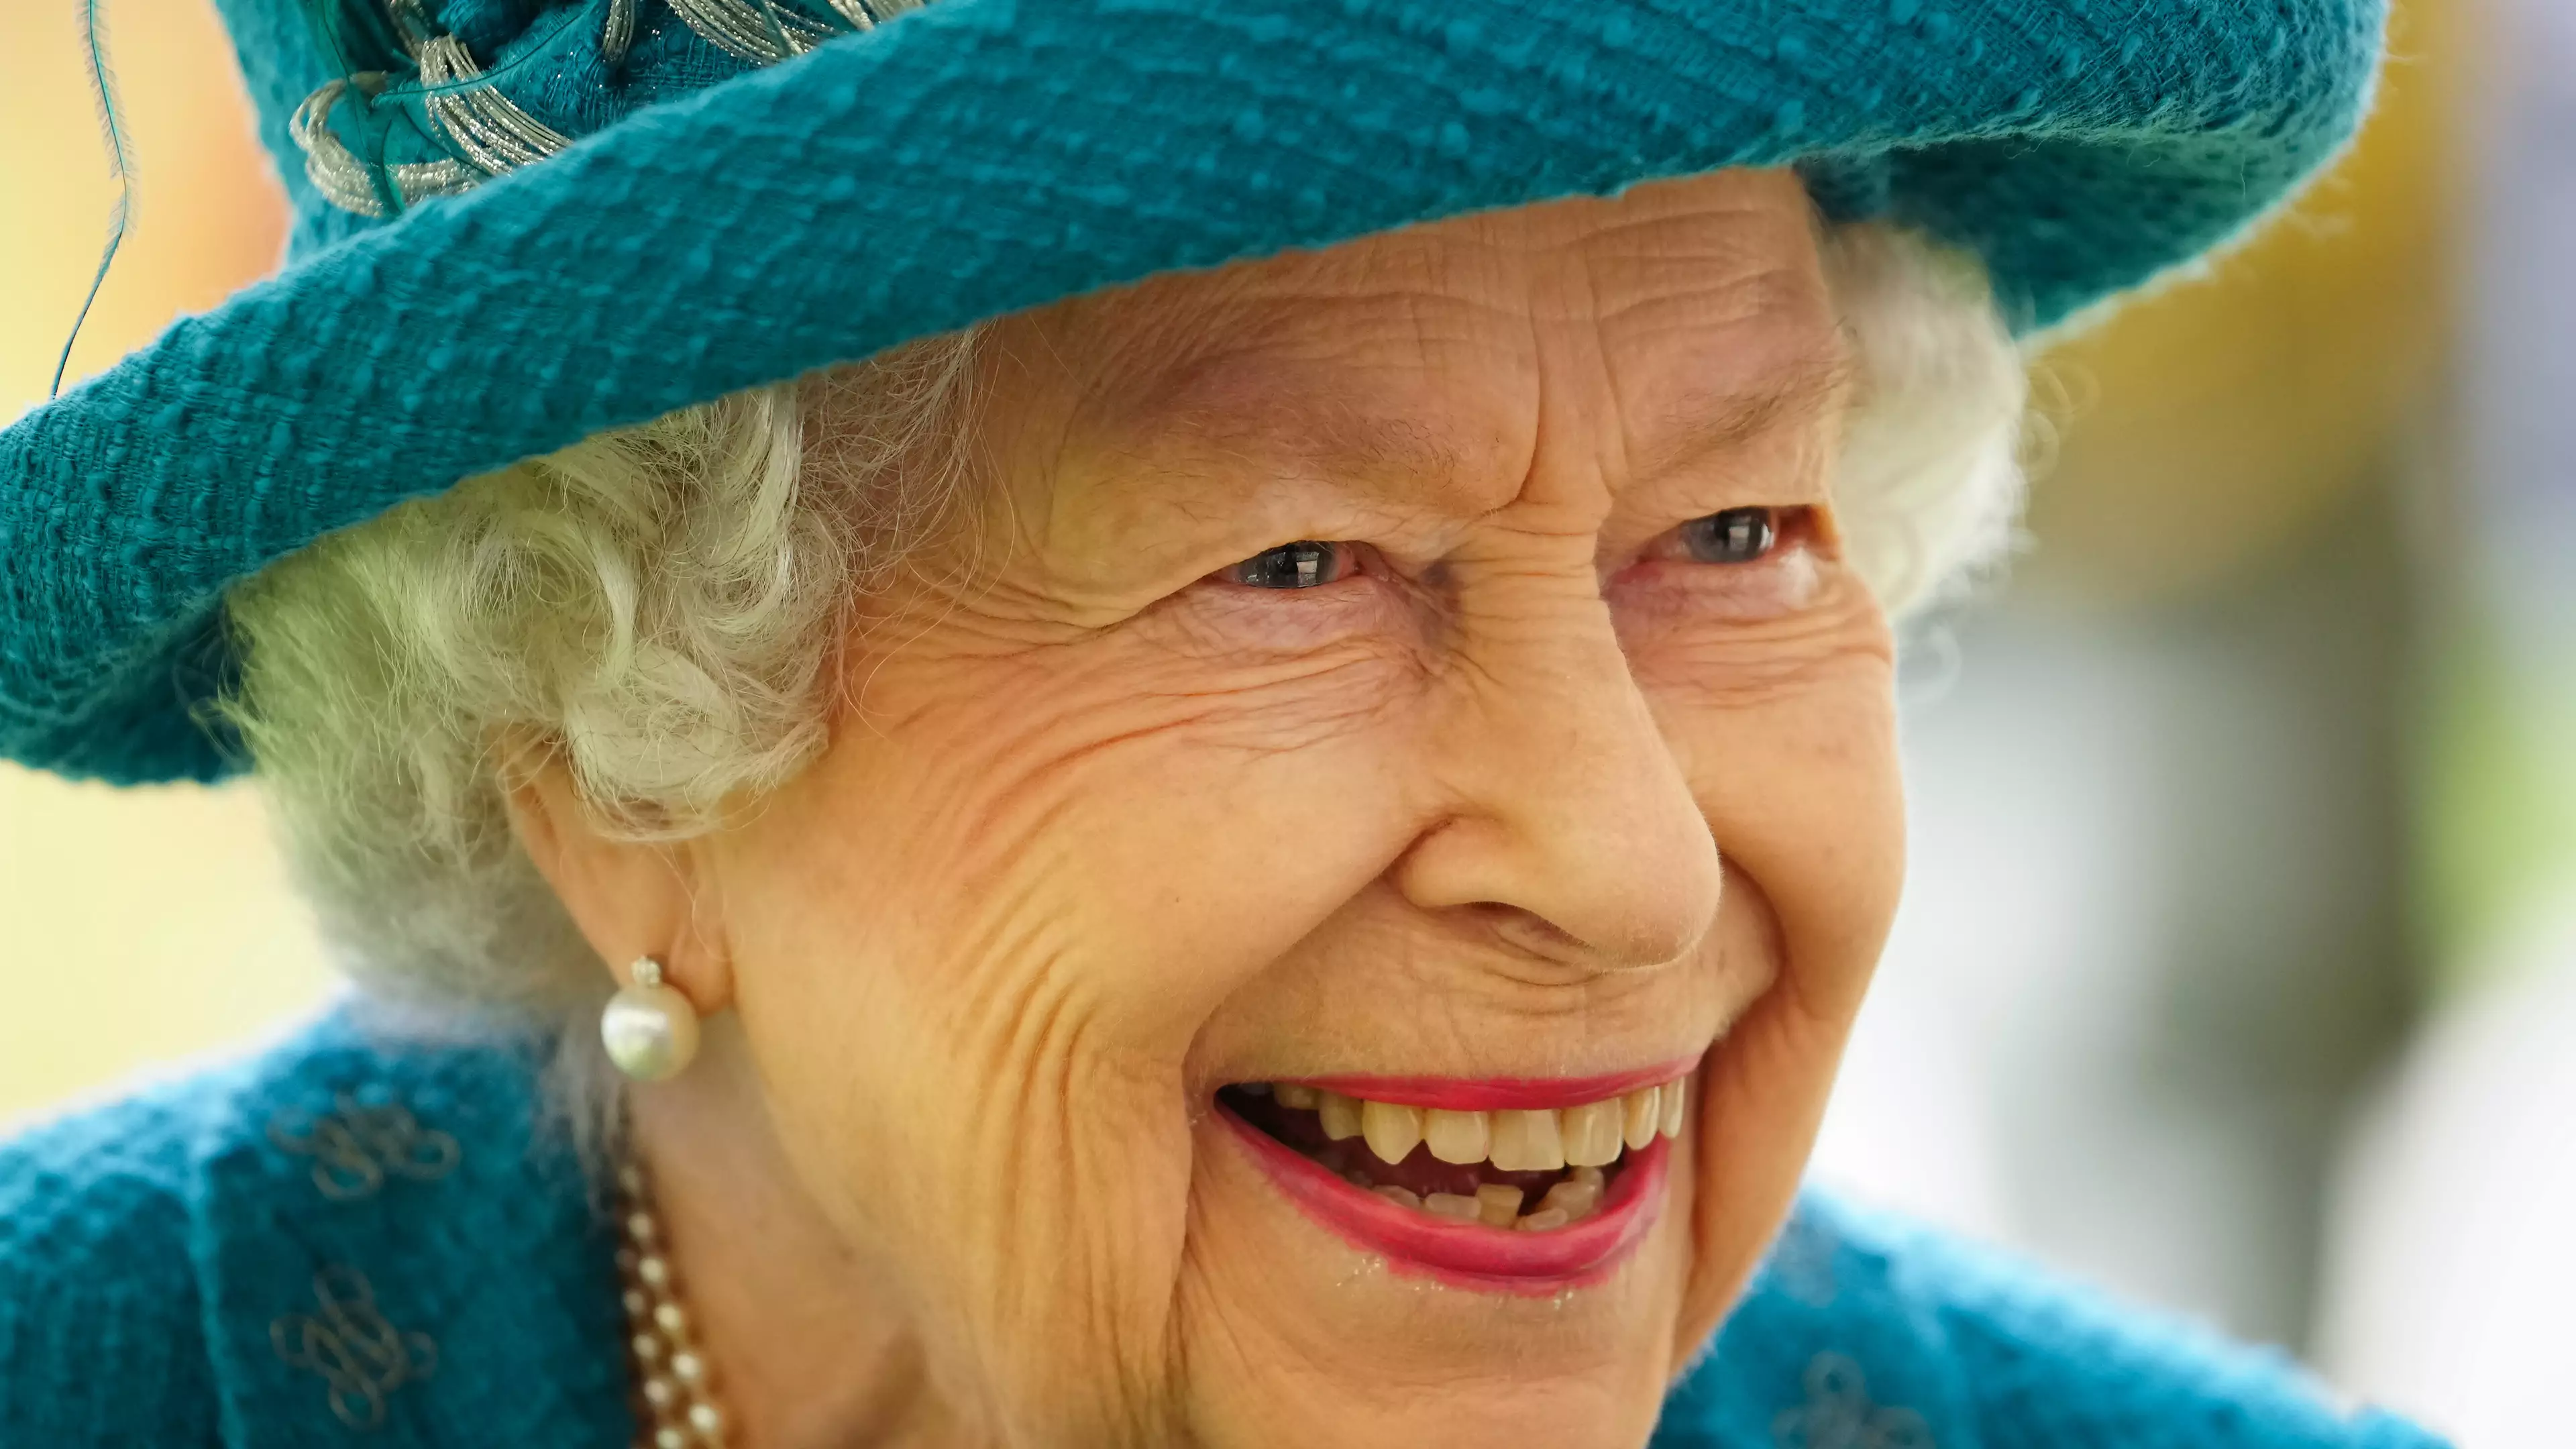 People Are Going Wild Over Queen Saying ‘Nah’ Like ‘Bloke Down The Pub’